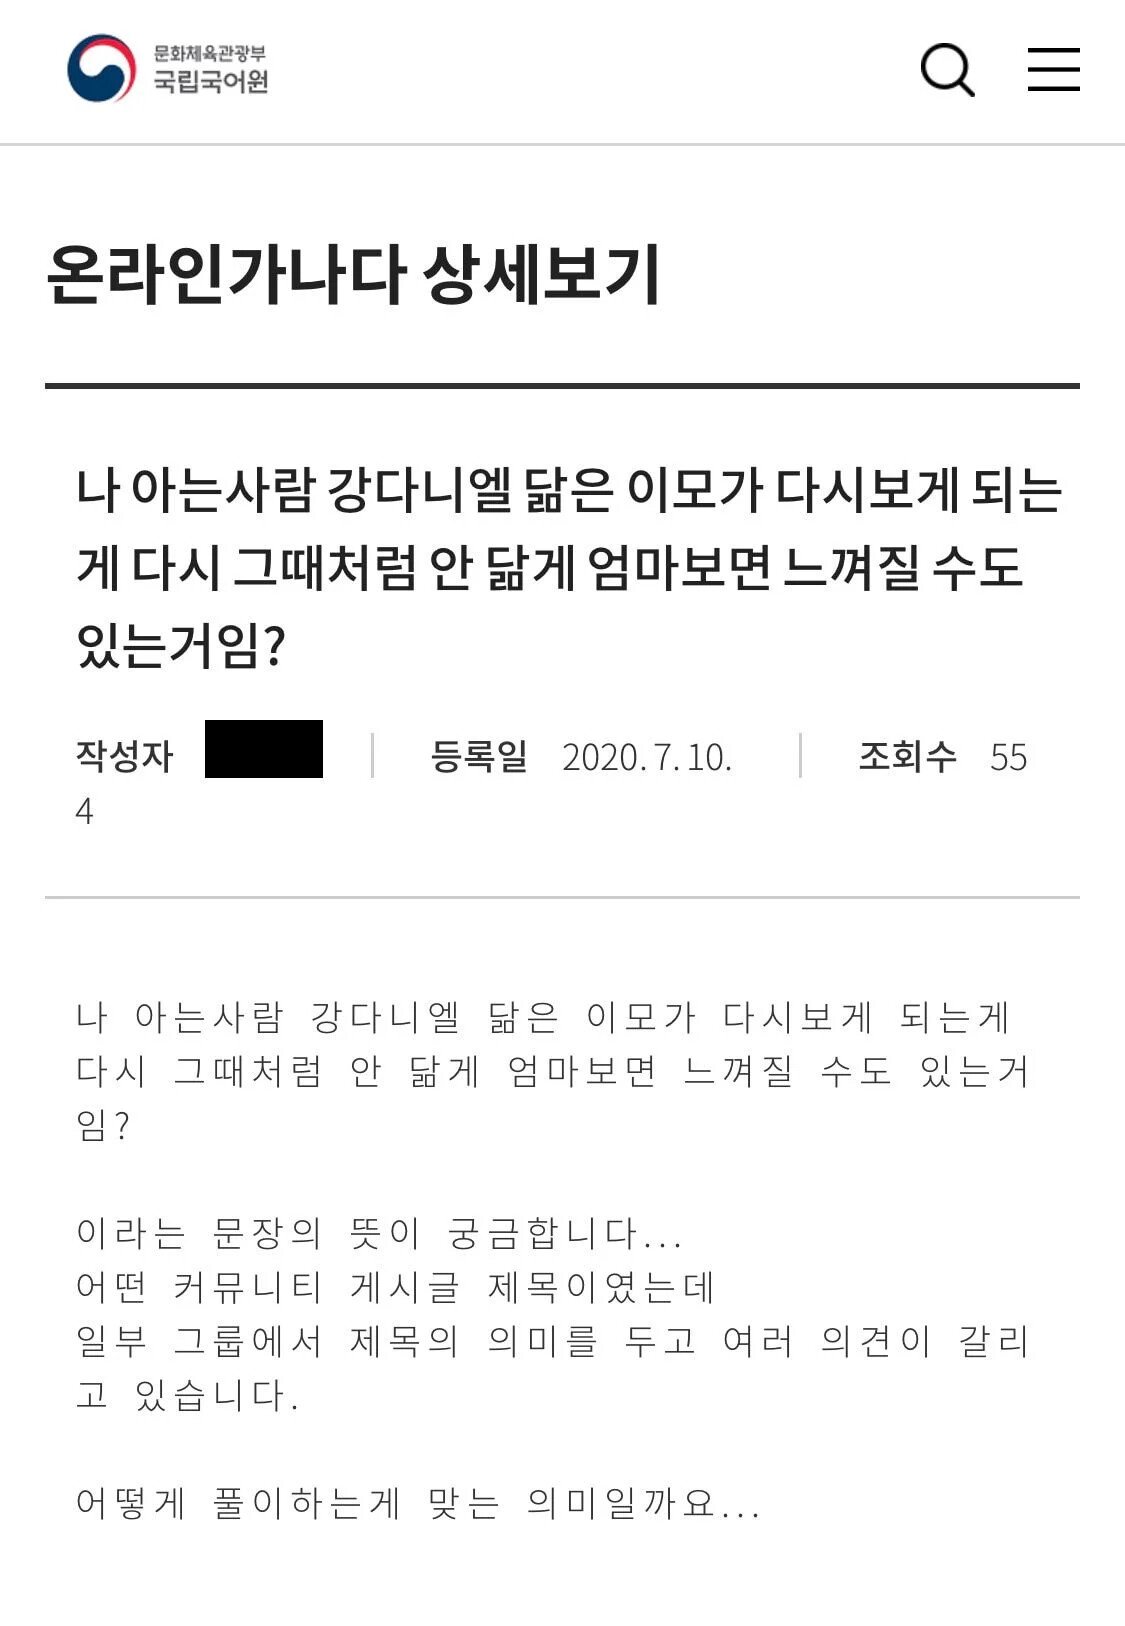 Interpretation of sentences given up by the National Institute of Korean Language